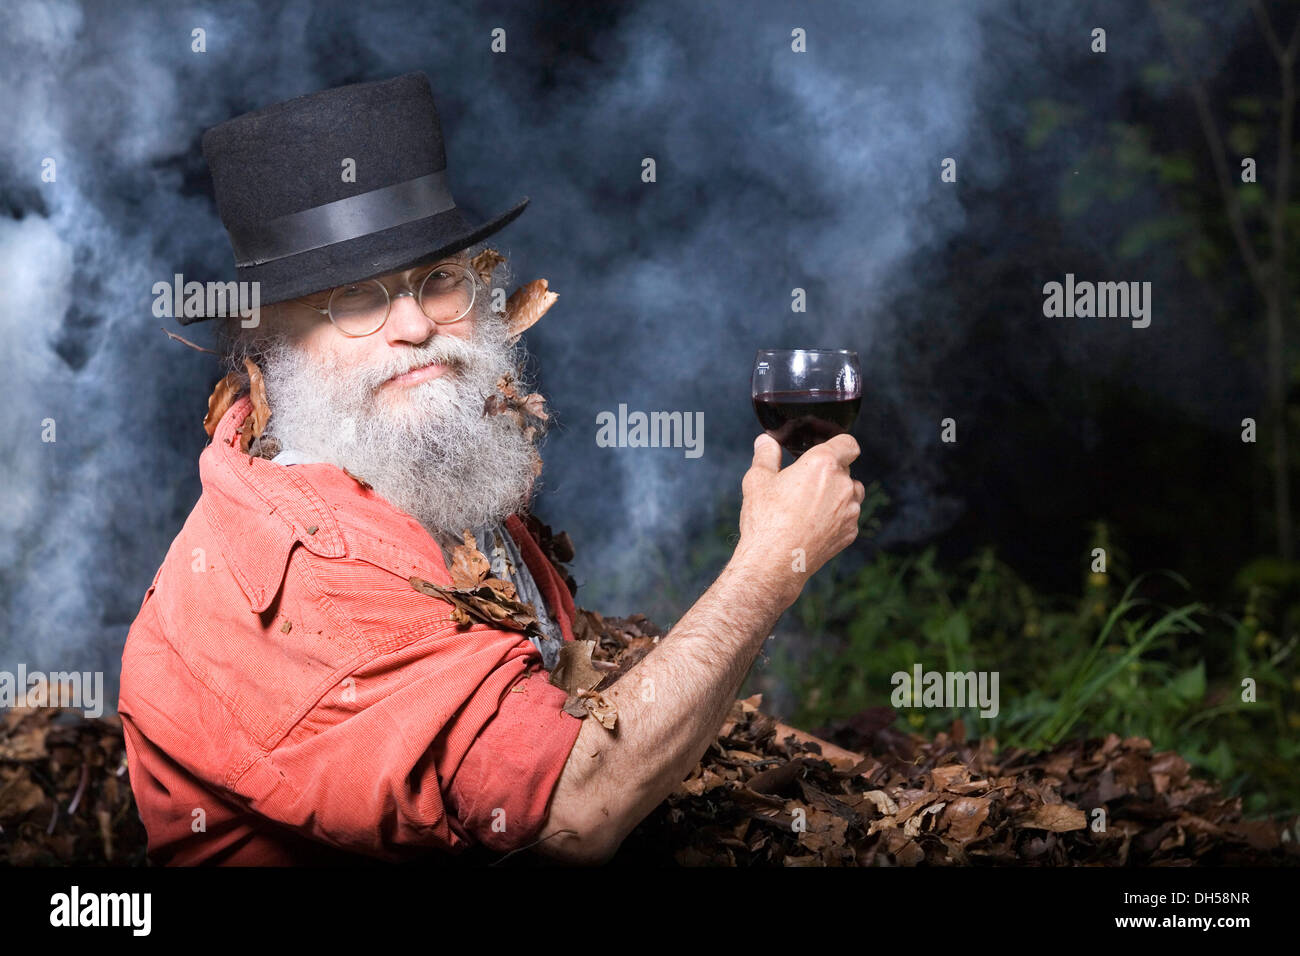 Elderly man with a long beard wearing a top hat and glasses, lying in a pile of autumn leaves and holding a glass of red wine Stock Photo